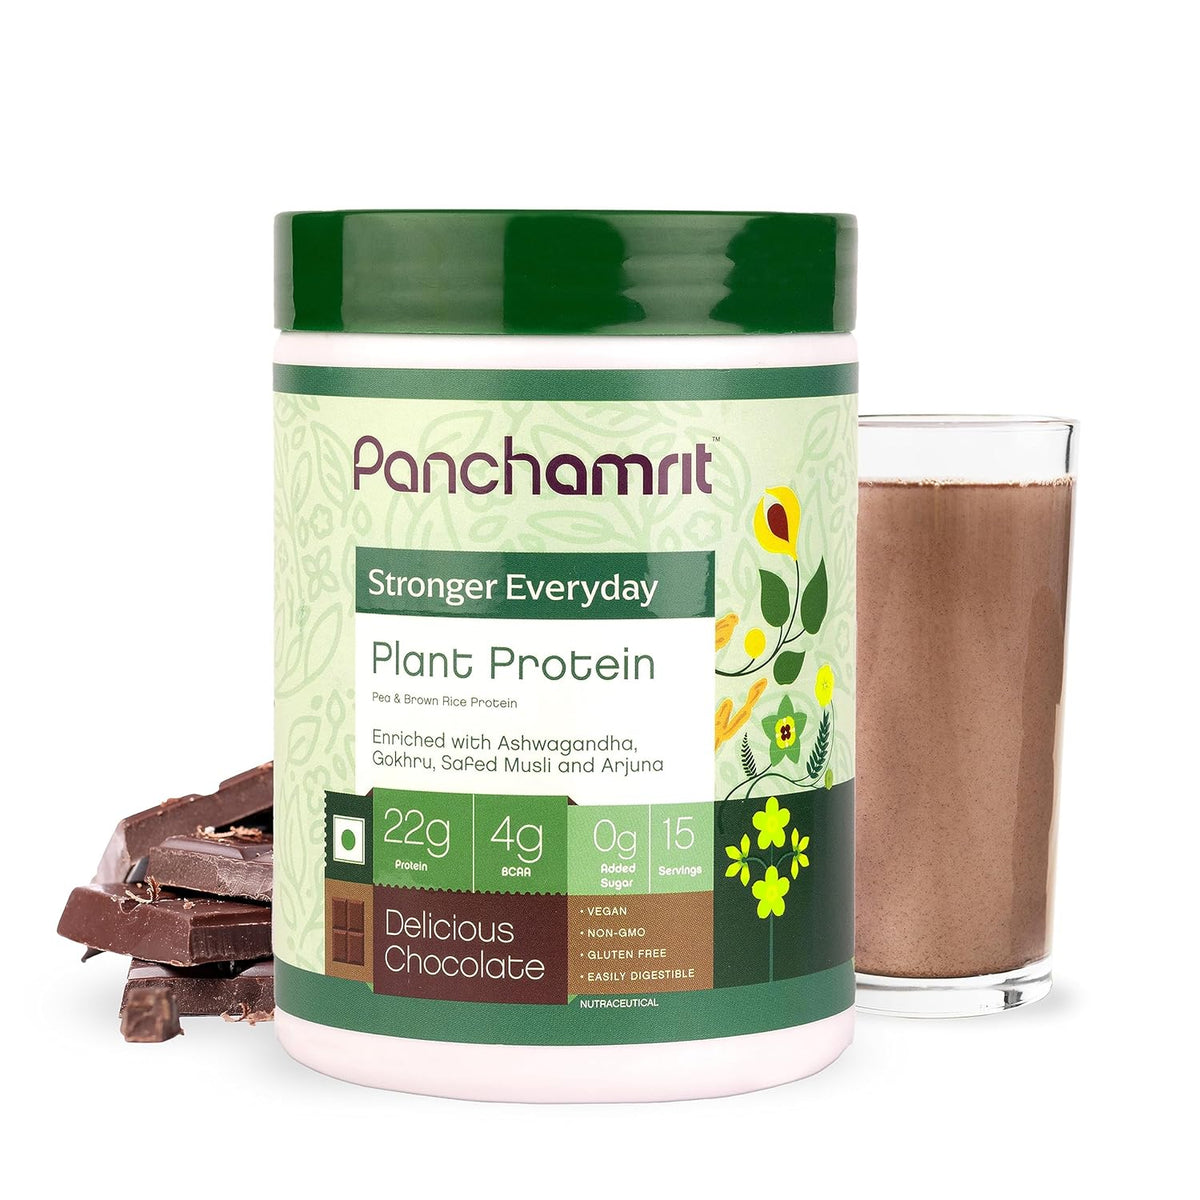 Panchamrit Stronger Everyday Plant Protein 500g (Delicious Chocolate)